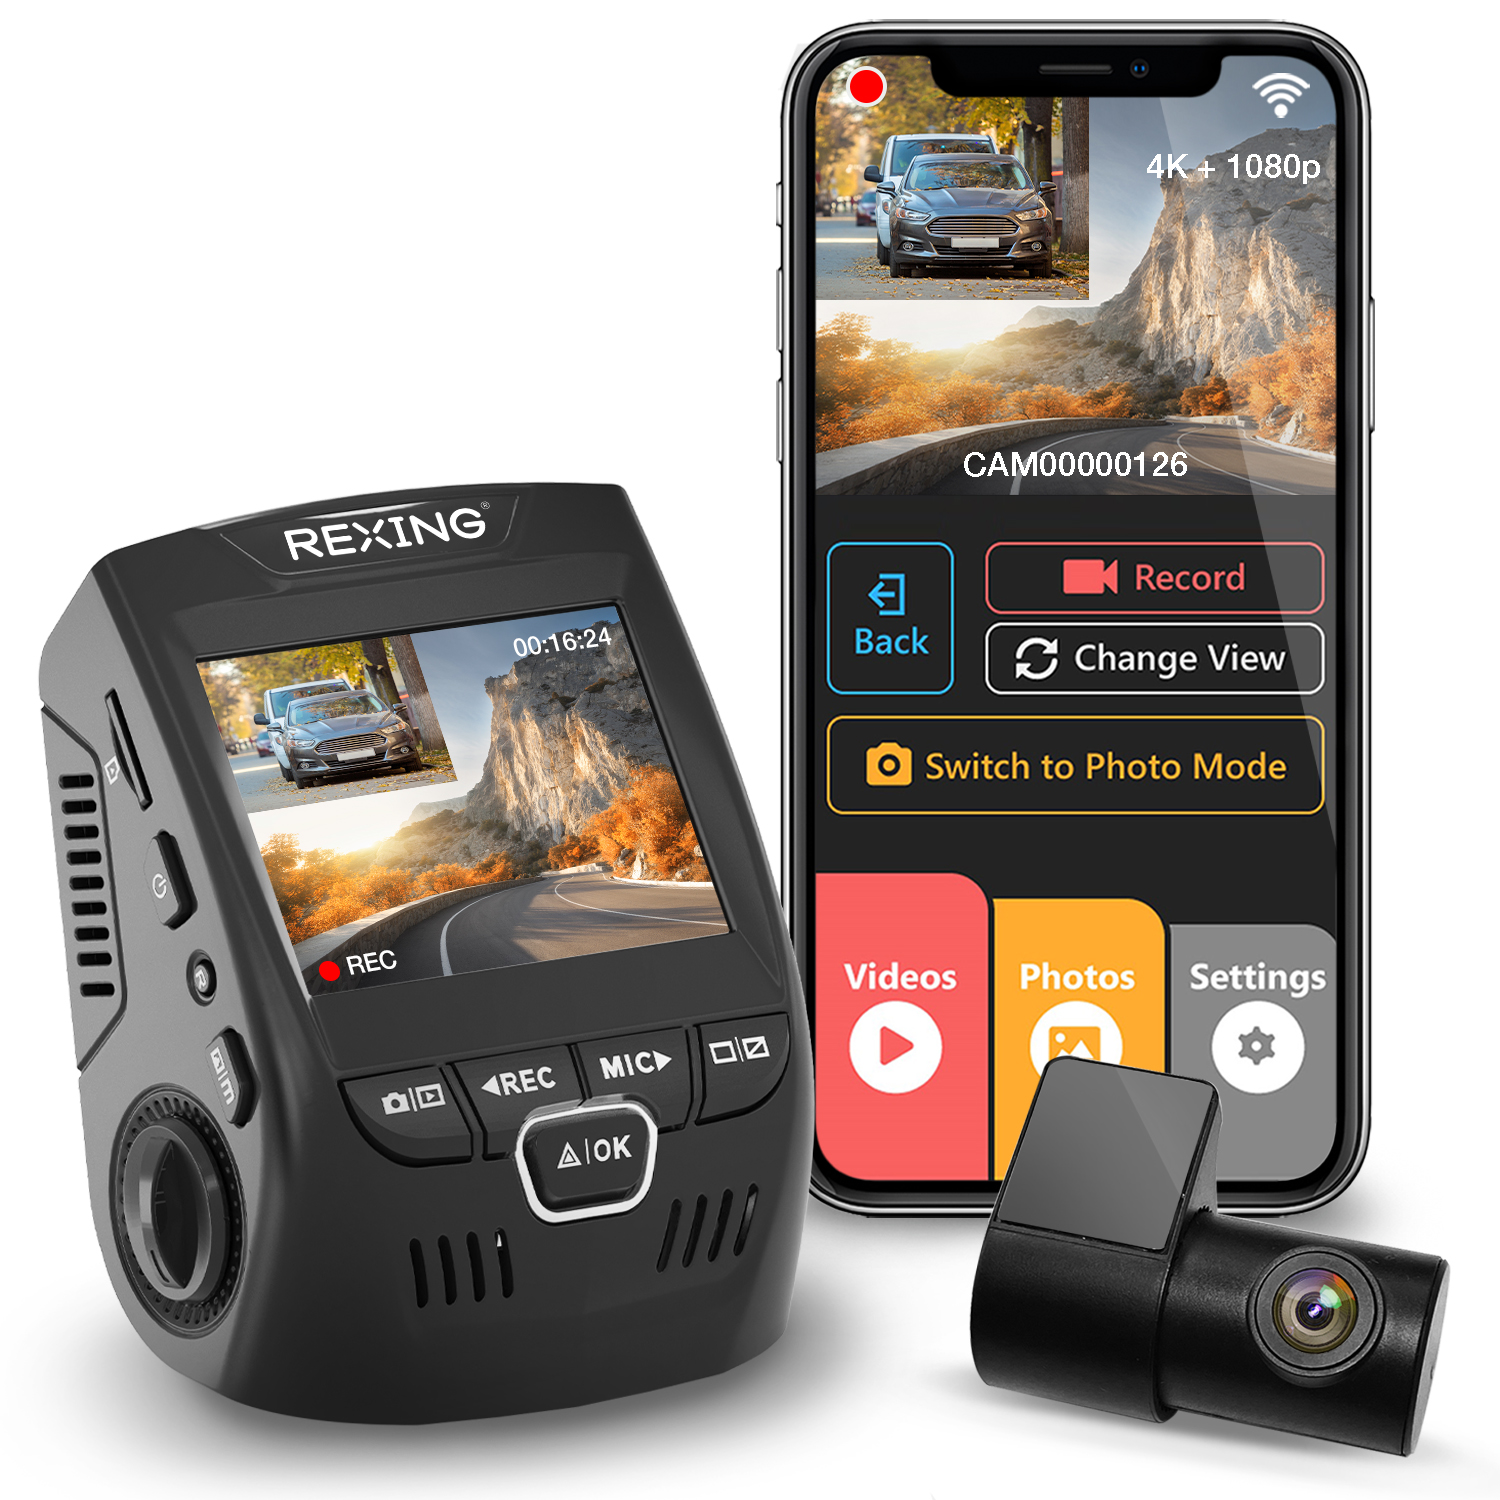 Rexing V1P 4K Dual Channel Dash Cam 4K+1080p with Wi-Fi W/ FREE 32GB memory card